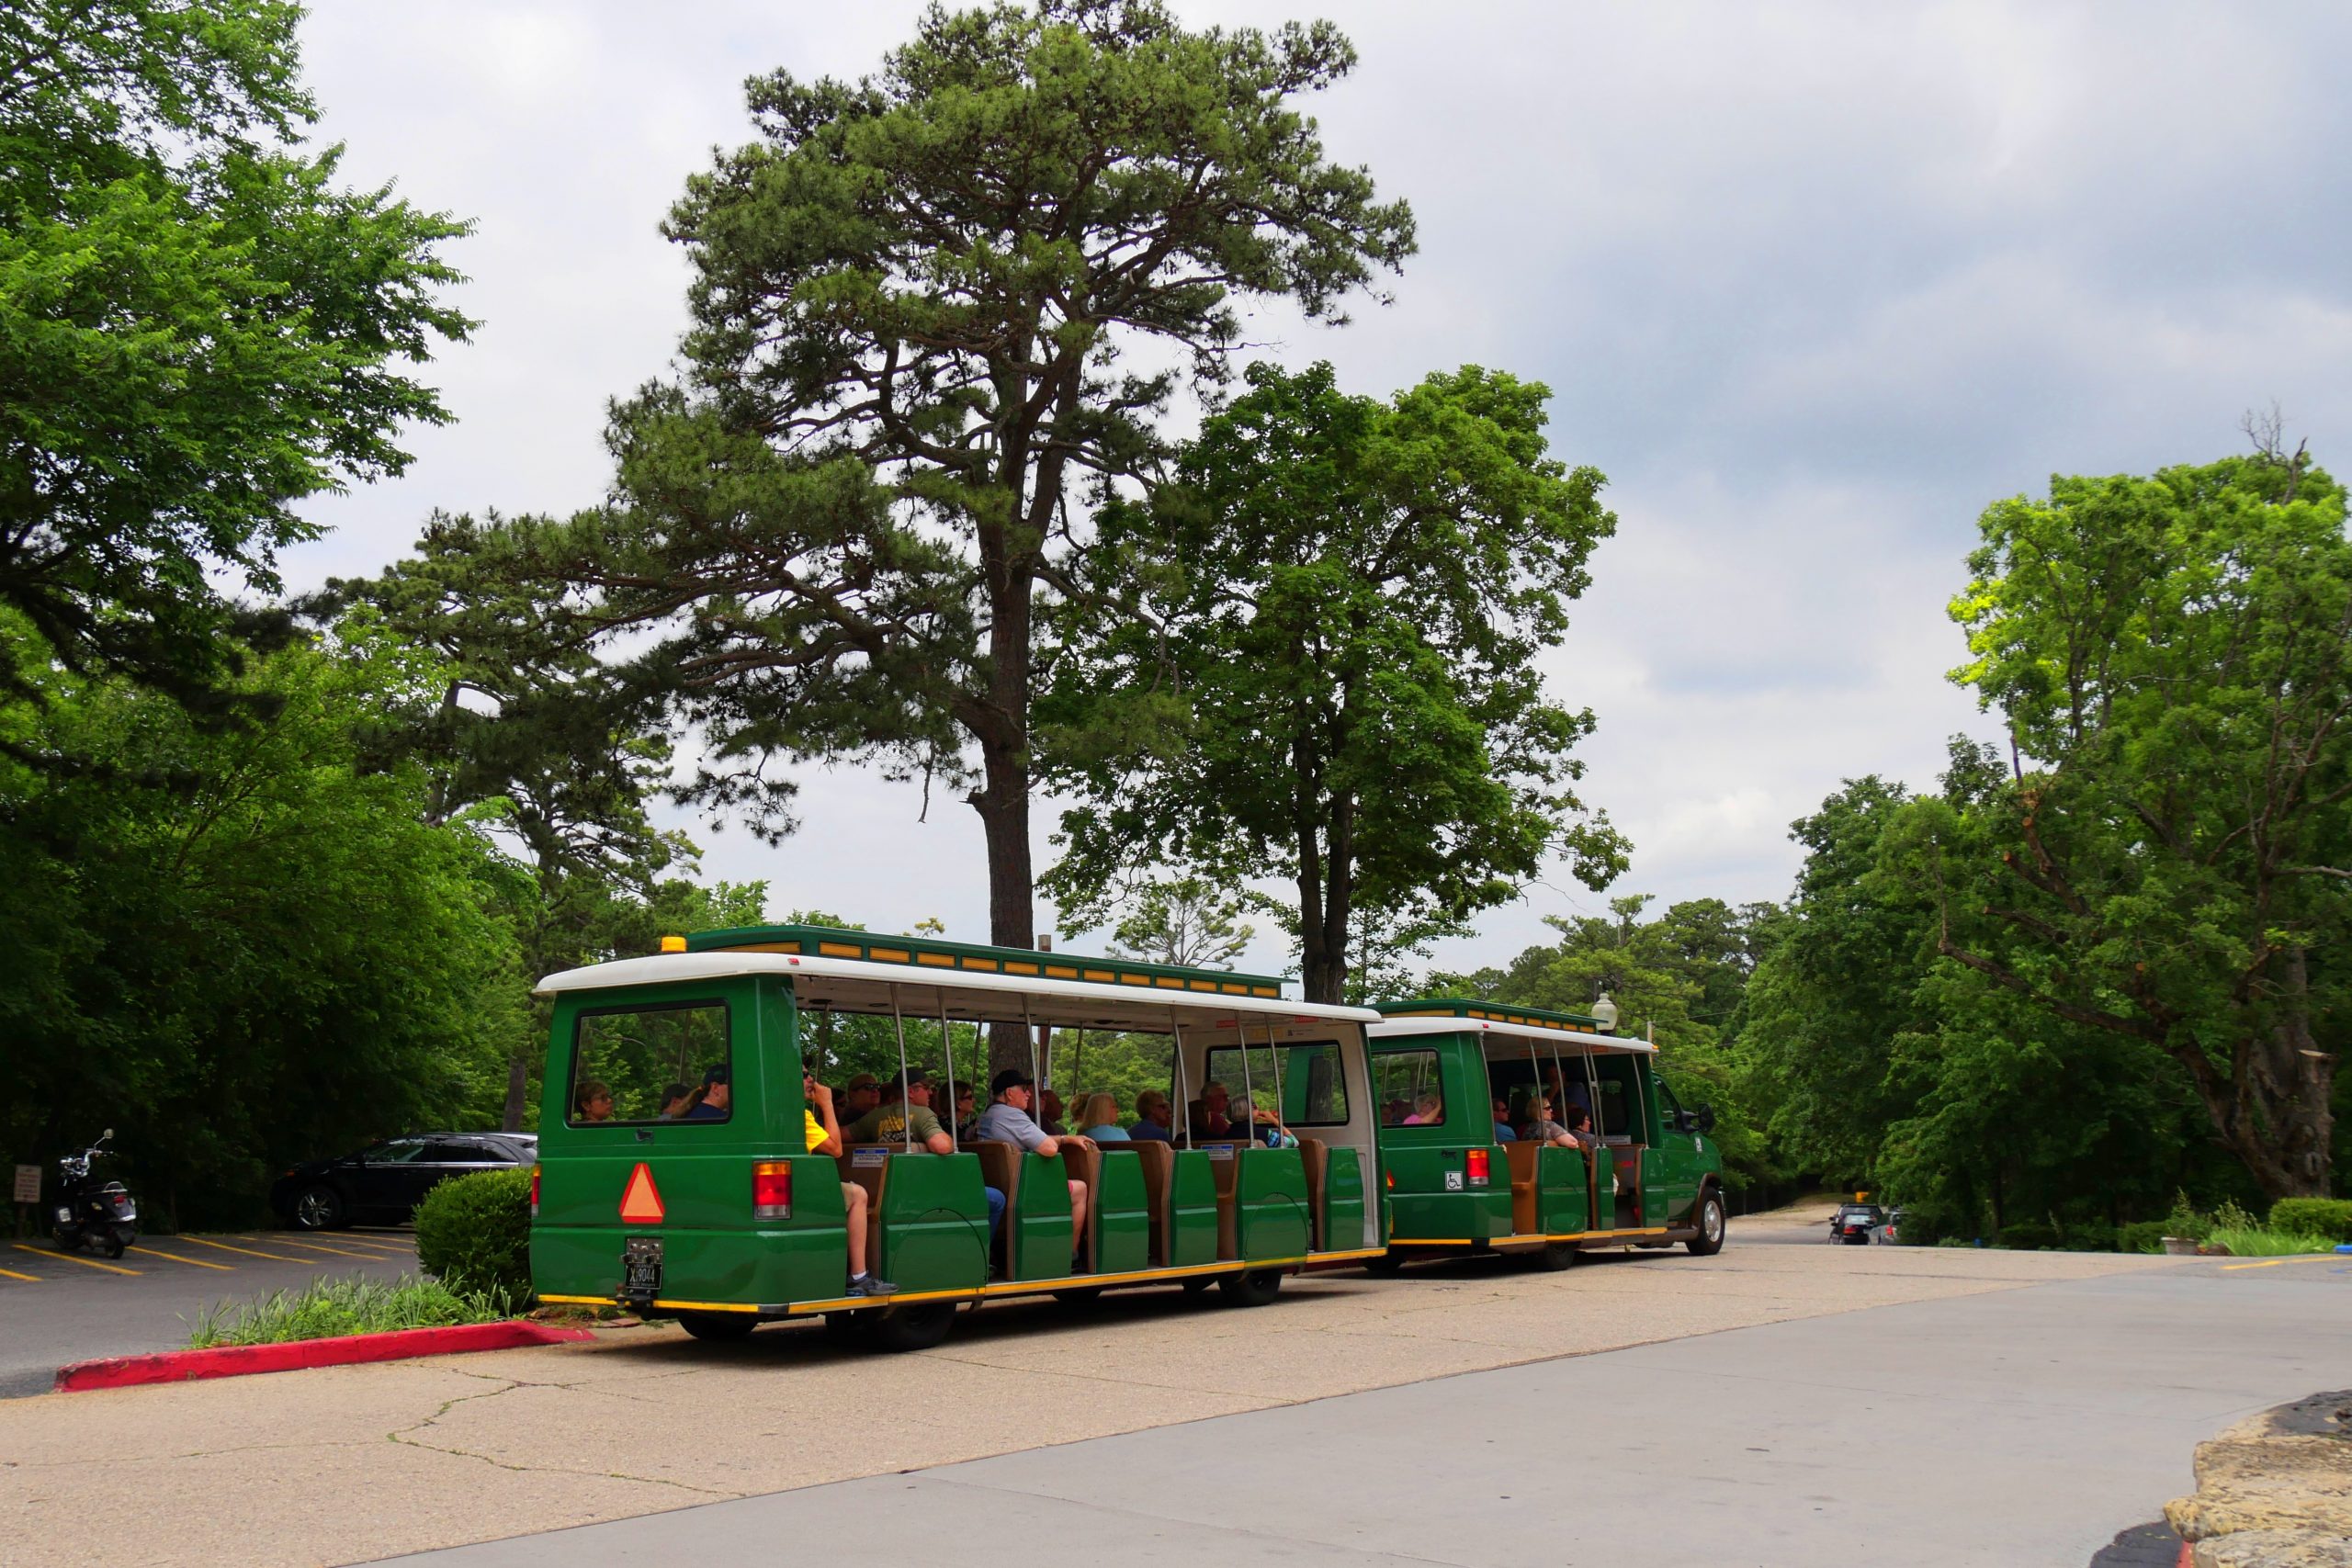 EUREKA SPRINGS, ARKANSAS—A green tram tours trolley with passengers runs around the historic district of of Eureka Springs. Taken in May 2017.